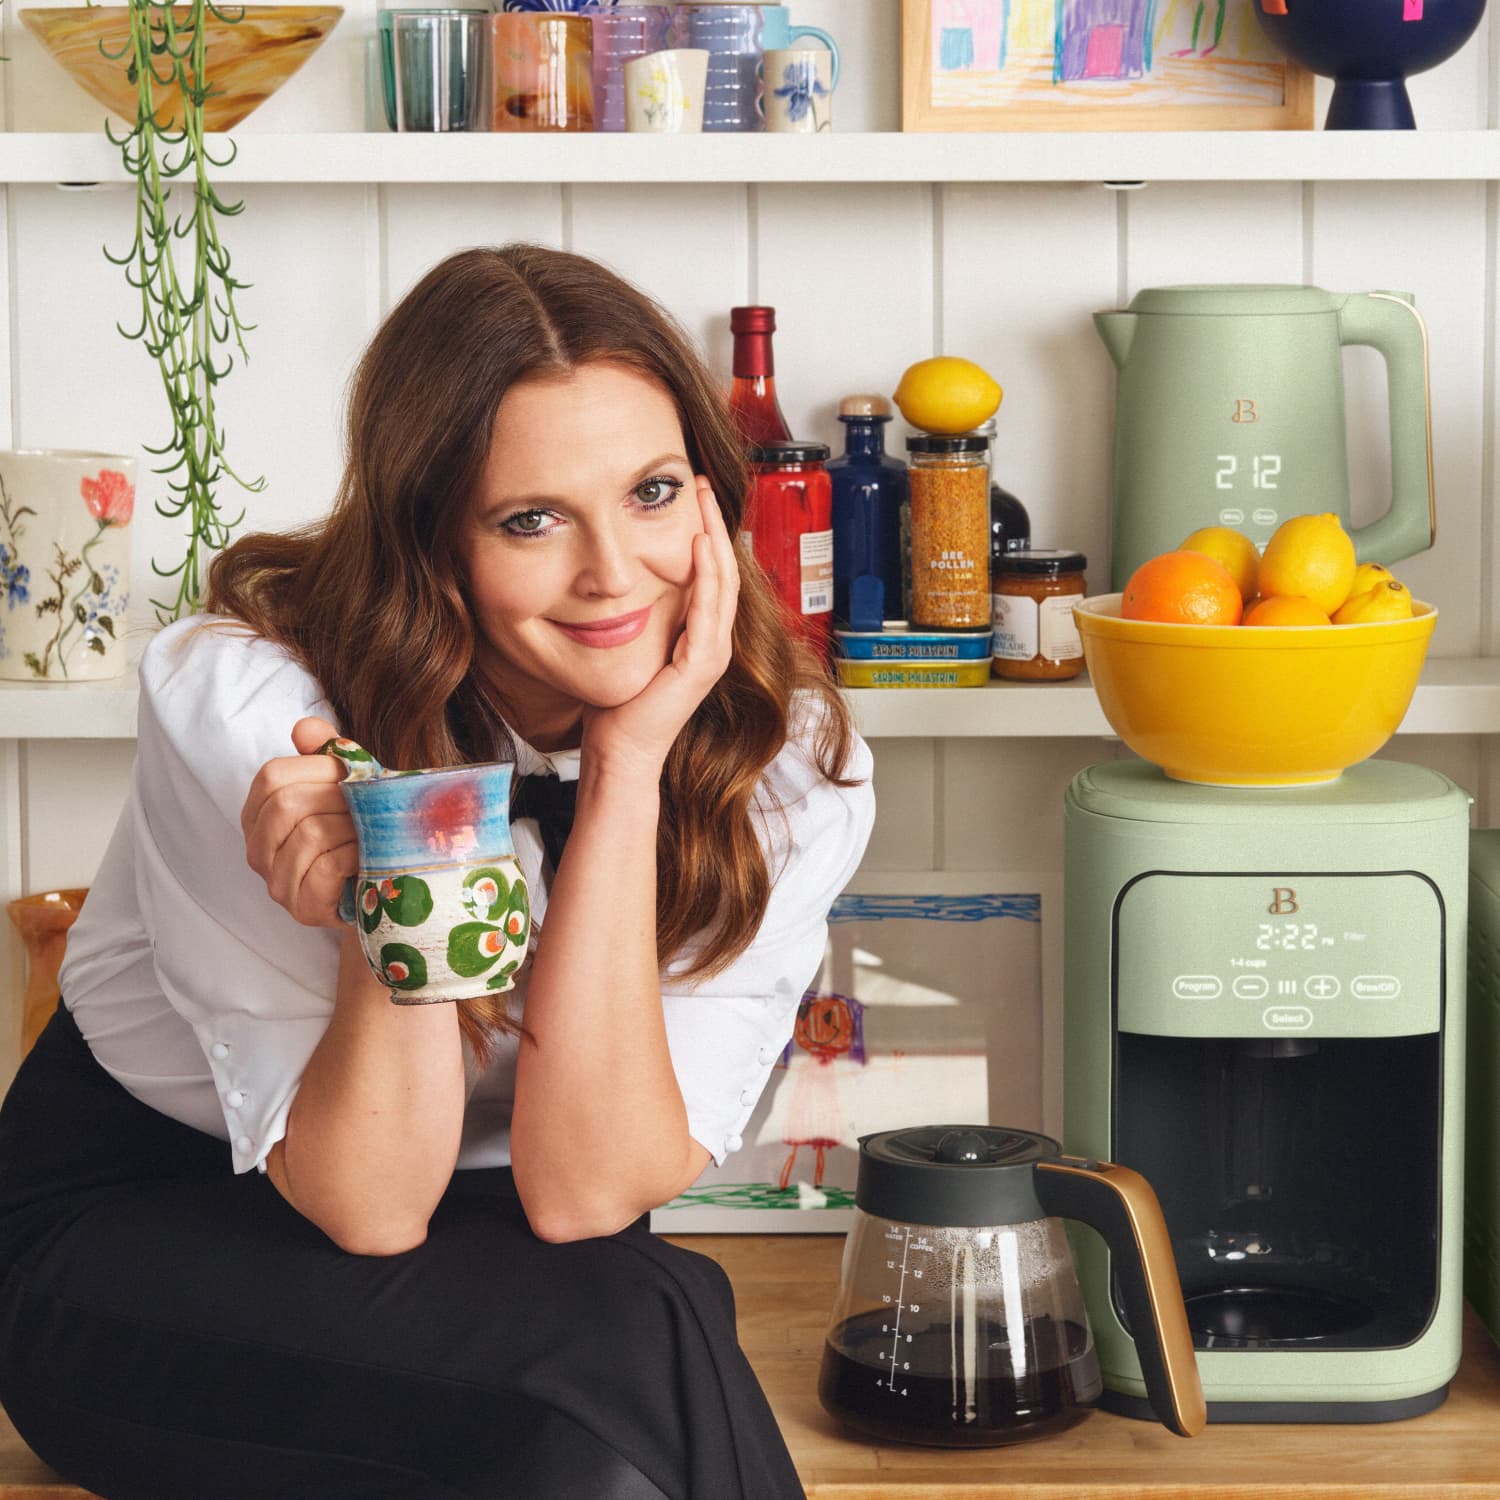 Drew Barrymore's Quirky Kitchen Renovation—Mess, Meltdowns, and All